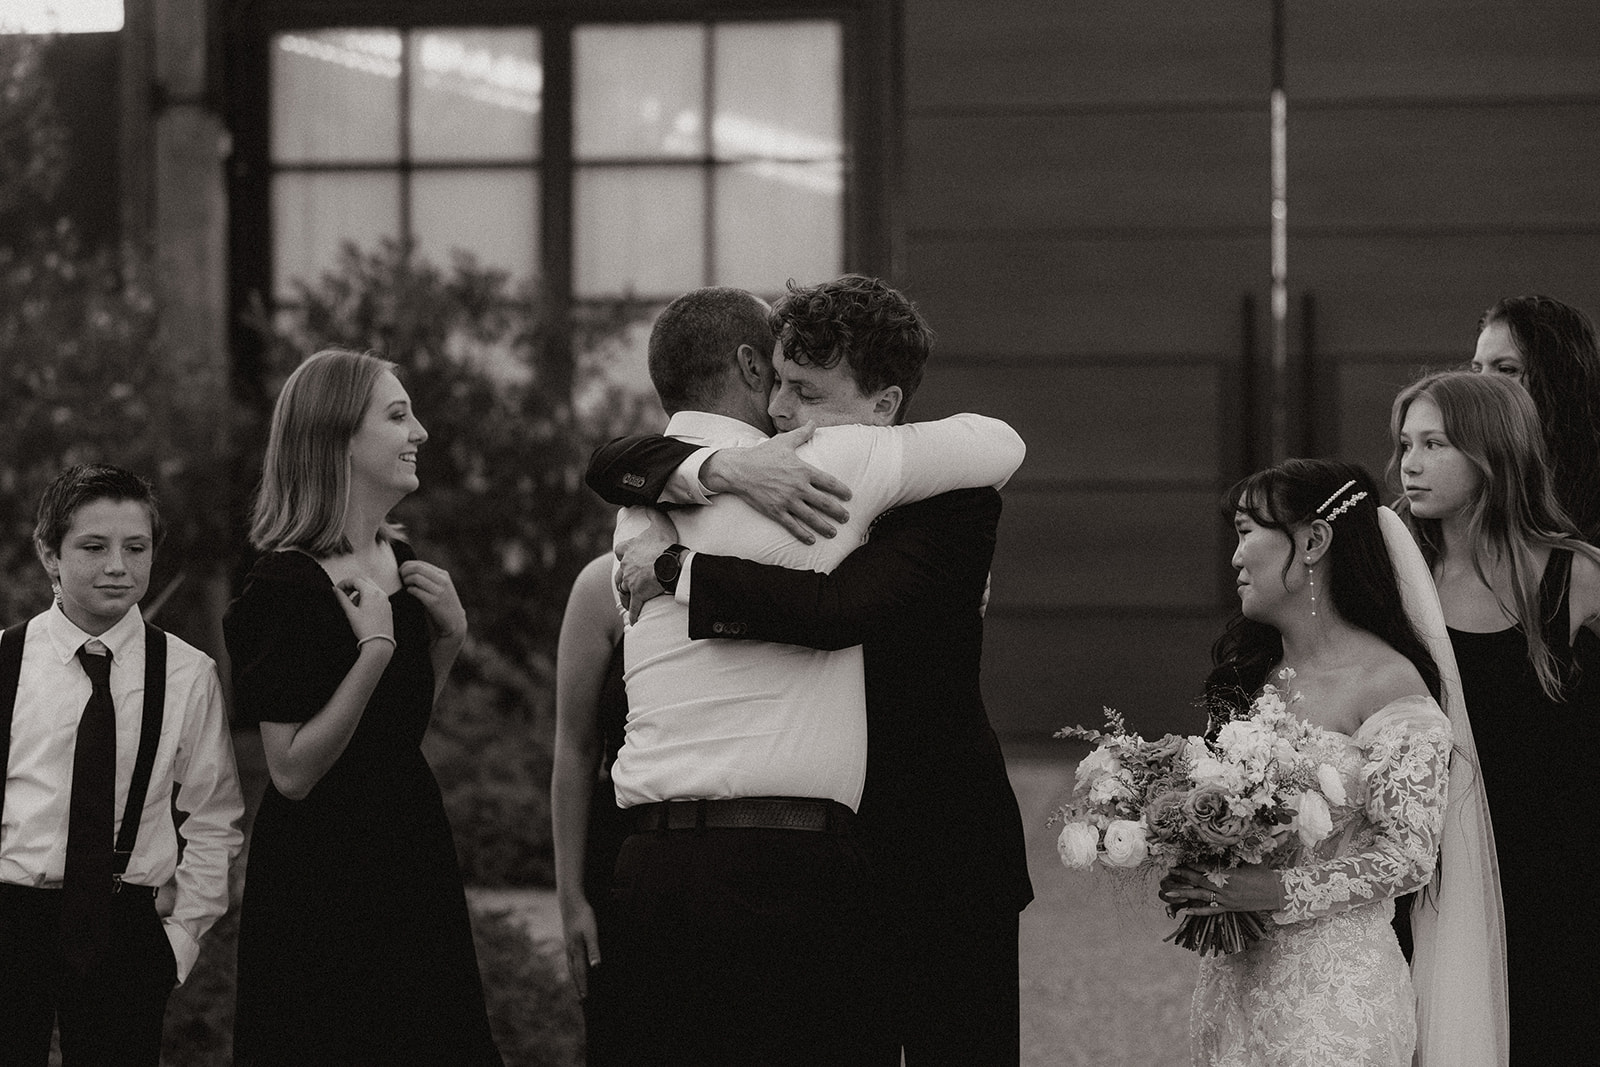 groom embraces a friend at the stunning Arizona wedding reception